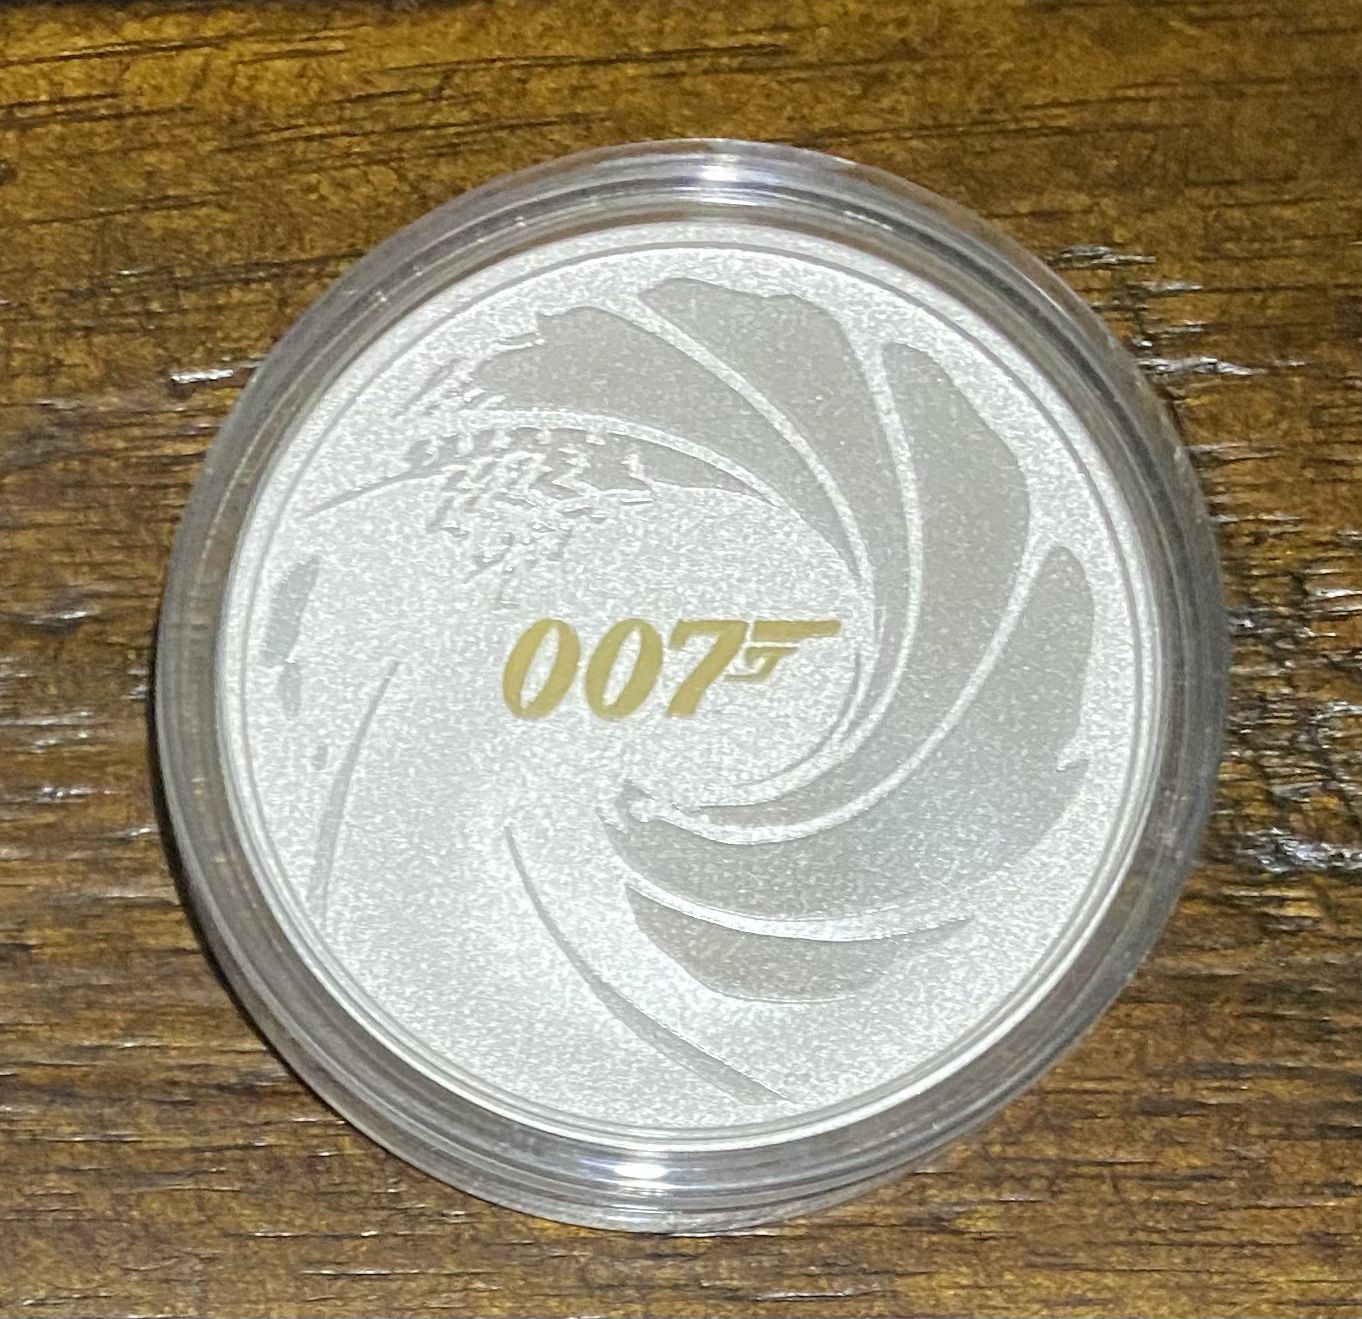 James Bond 007 Limited Edition Gold Logo Perth Mint Silver Coin 1oz - New, Mint